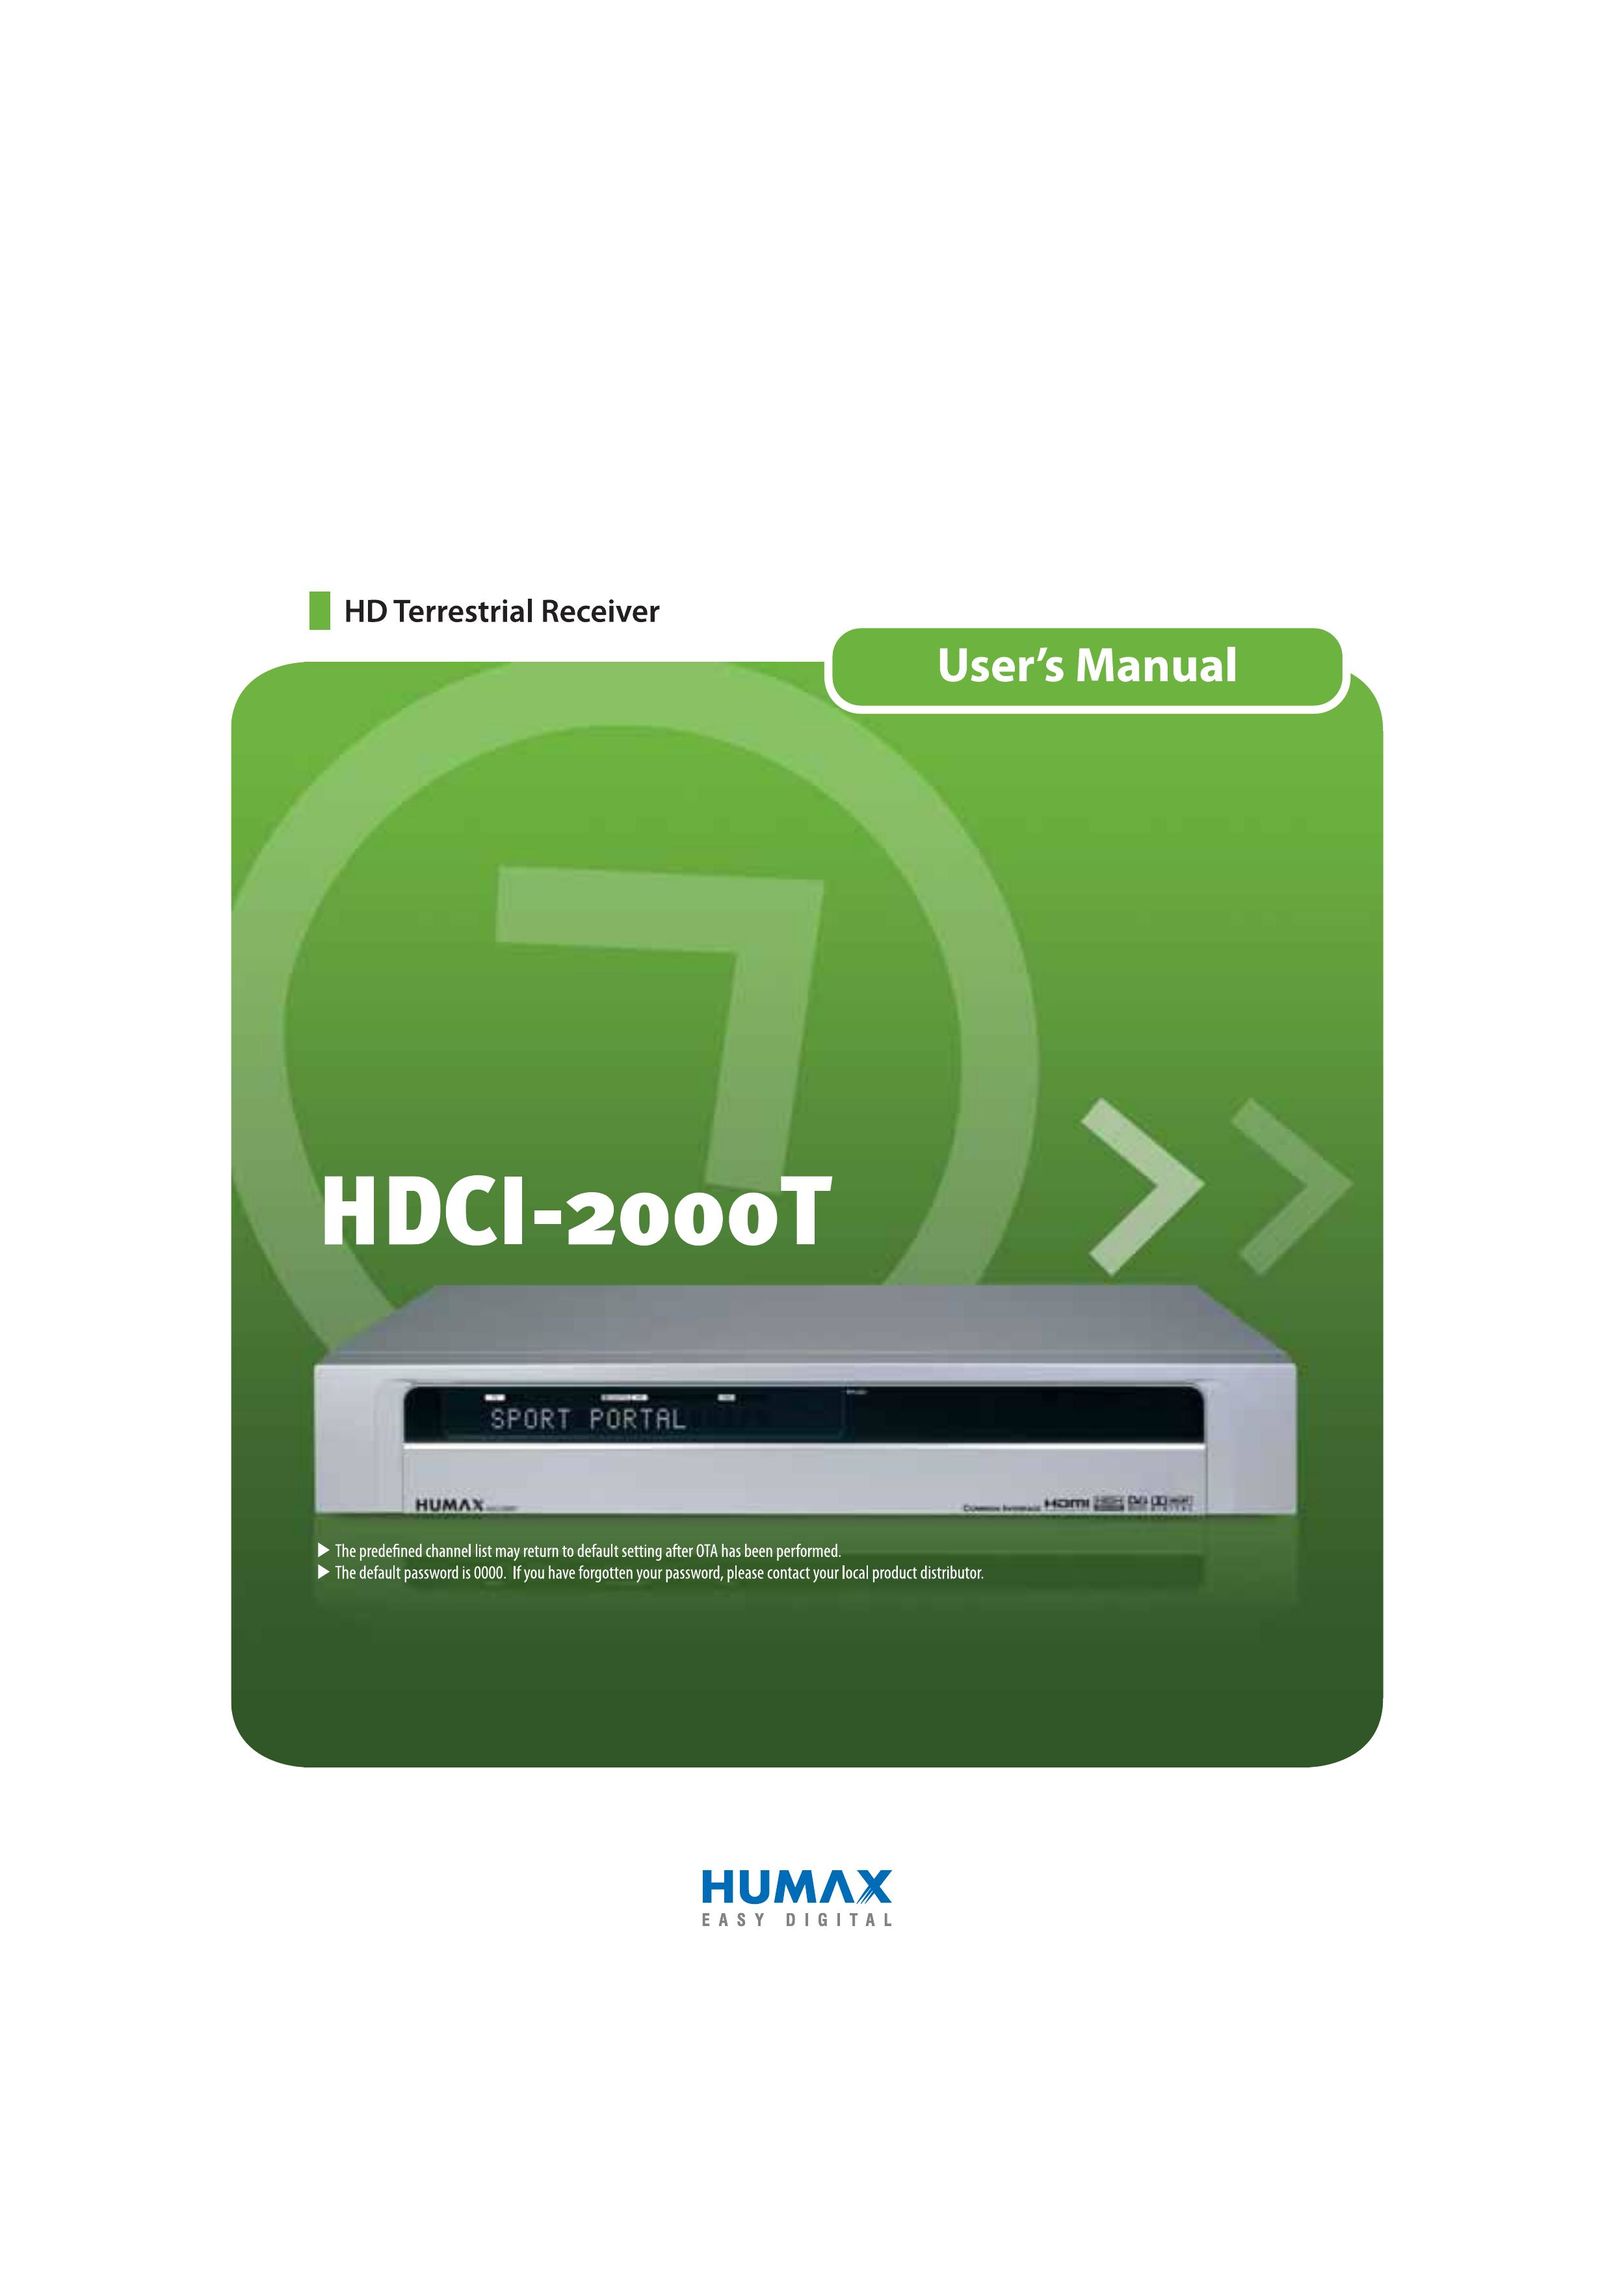 Humax HDCI-2000T Stereo Receiver User Manual